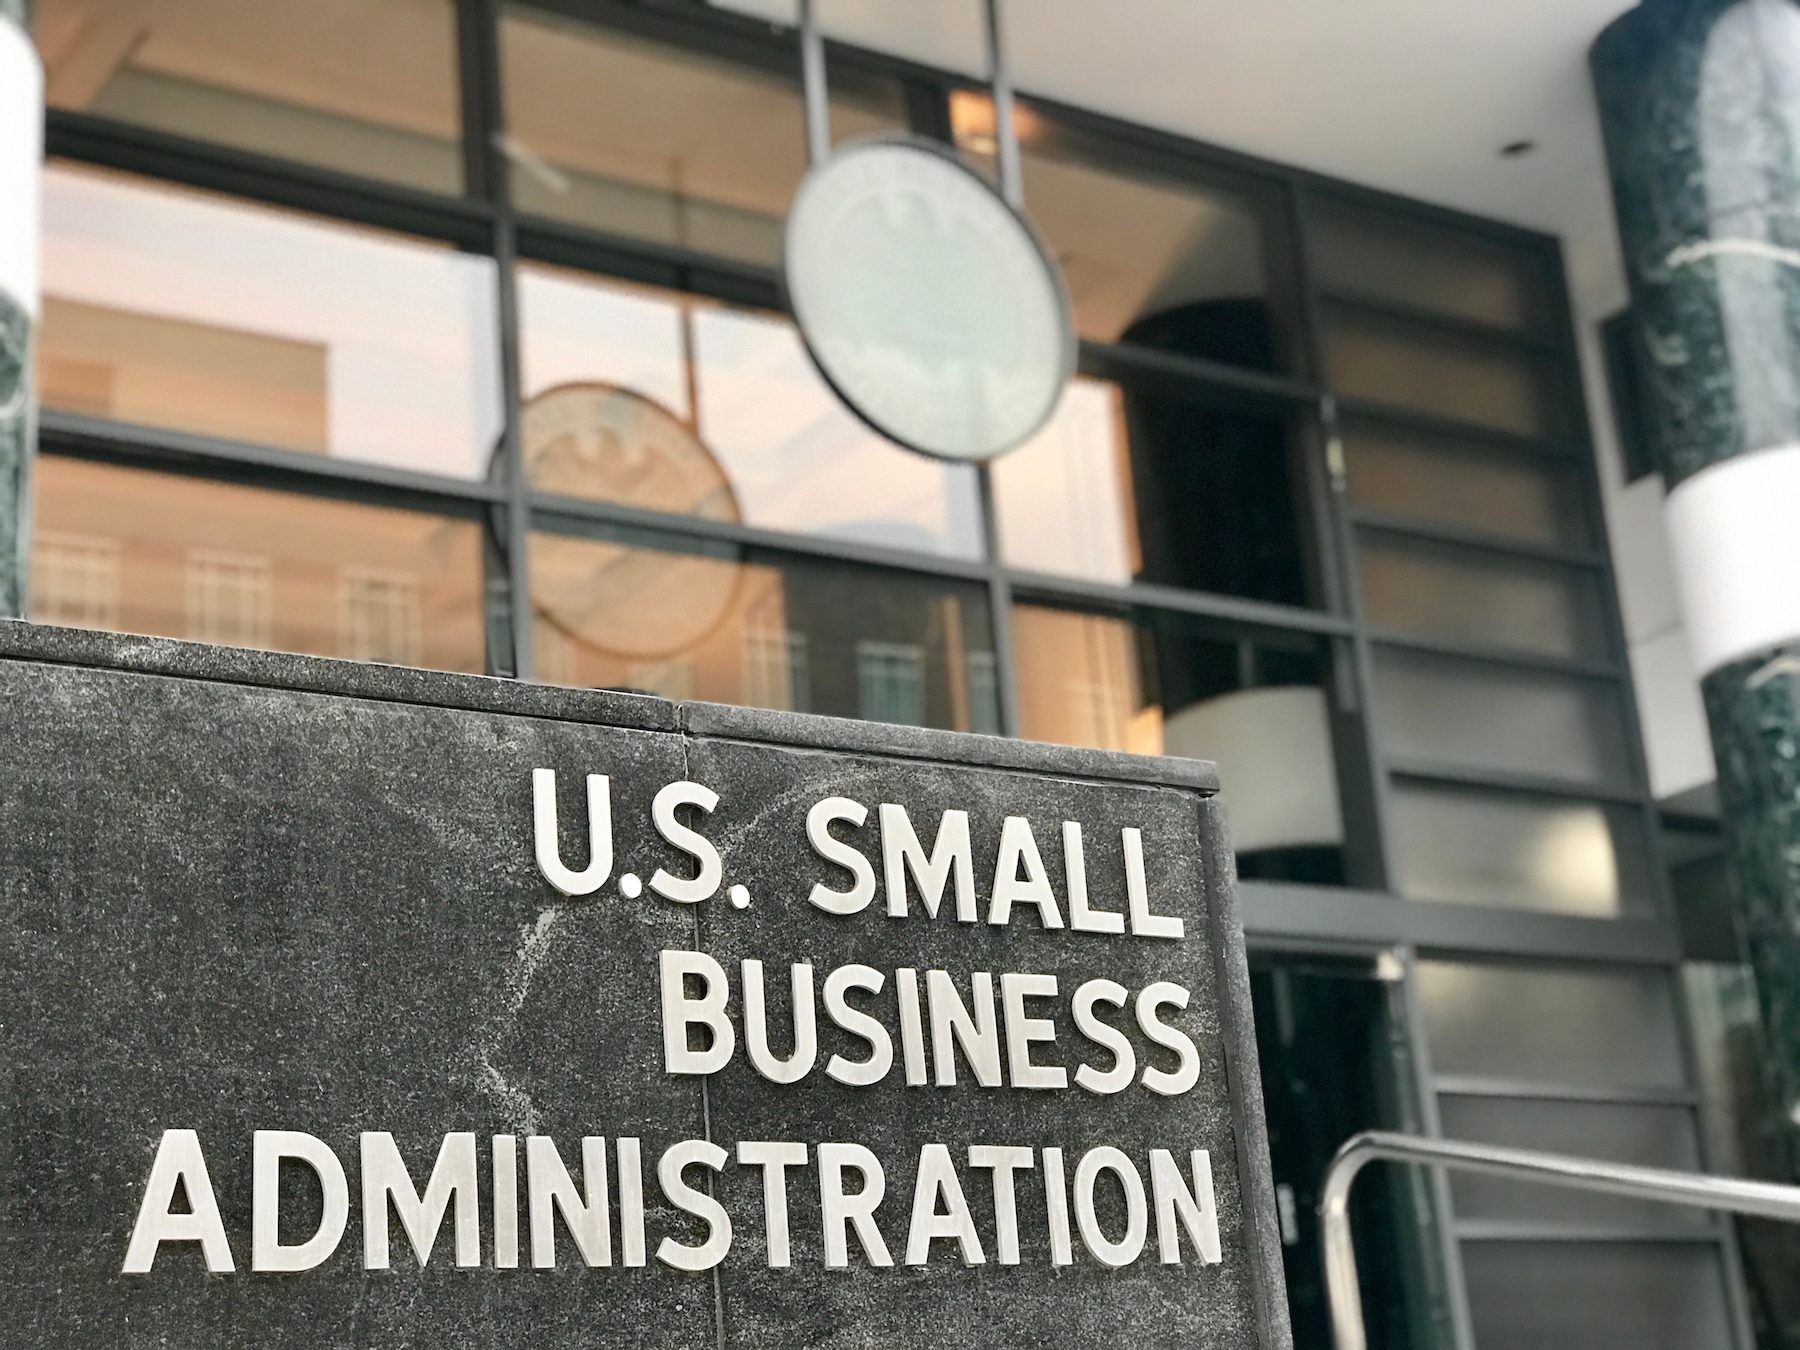 Revised SBA Rules Mean More Opportunities for Small Businesses